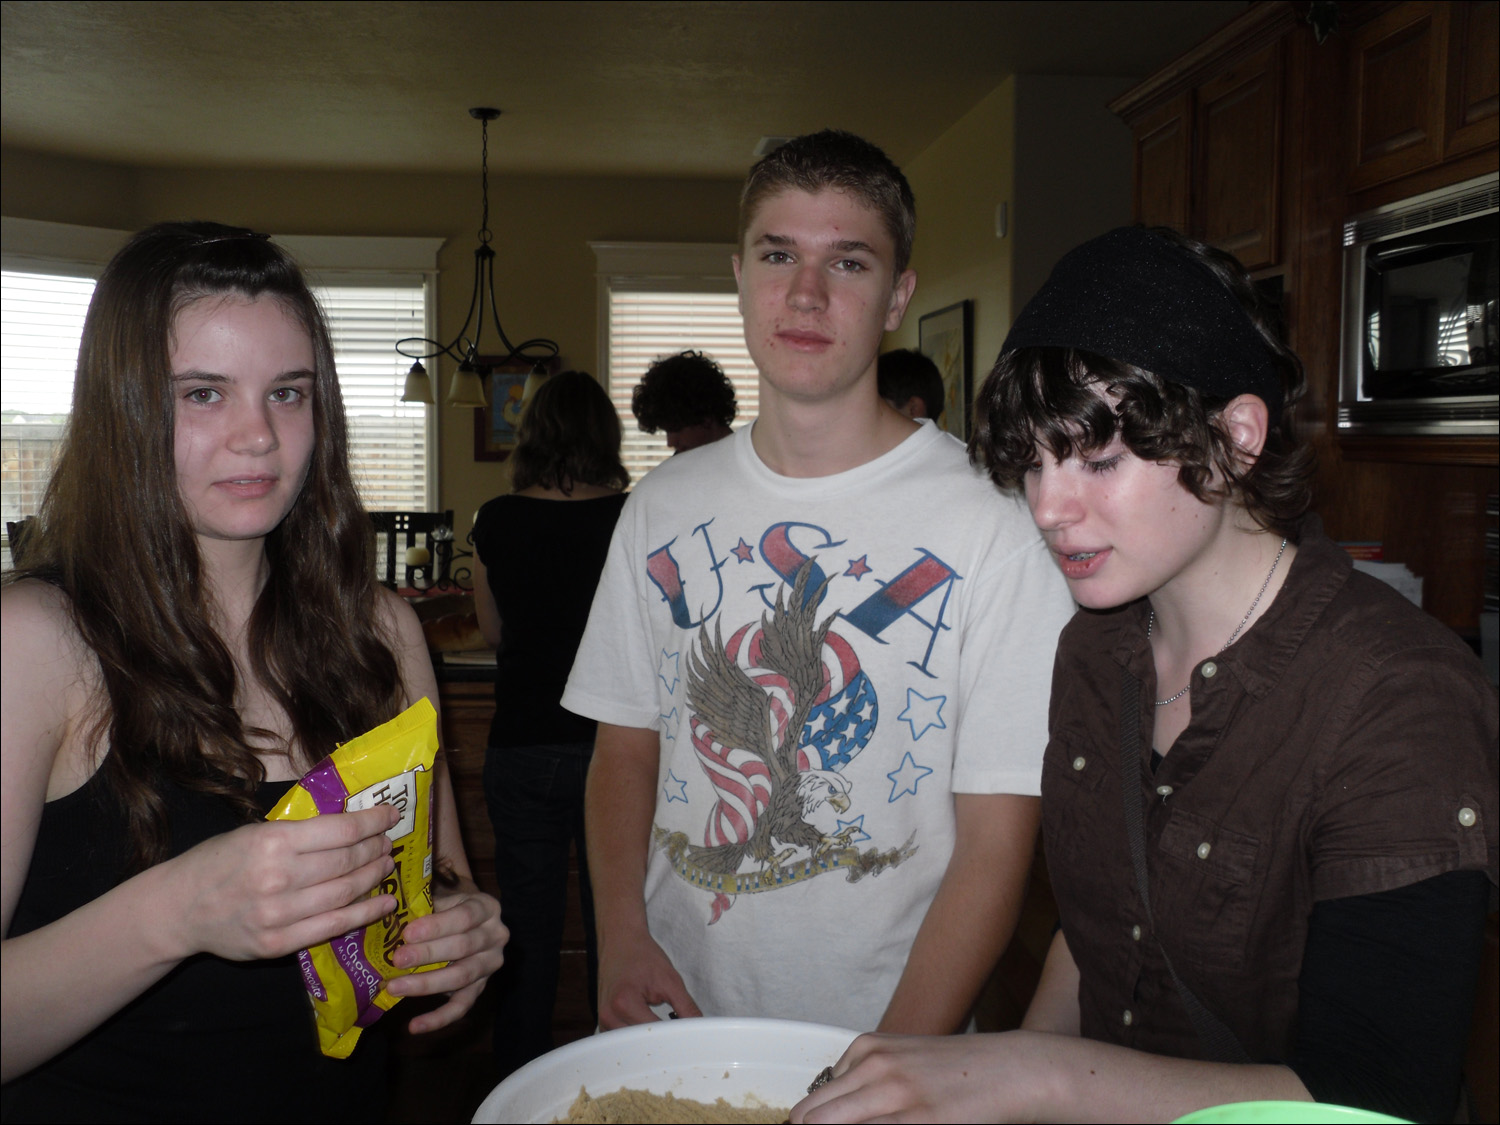 At the Bruton's home in Meridian Idaho; L-R Catherine, Daniel, & Anna Bruton